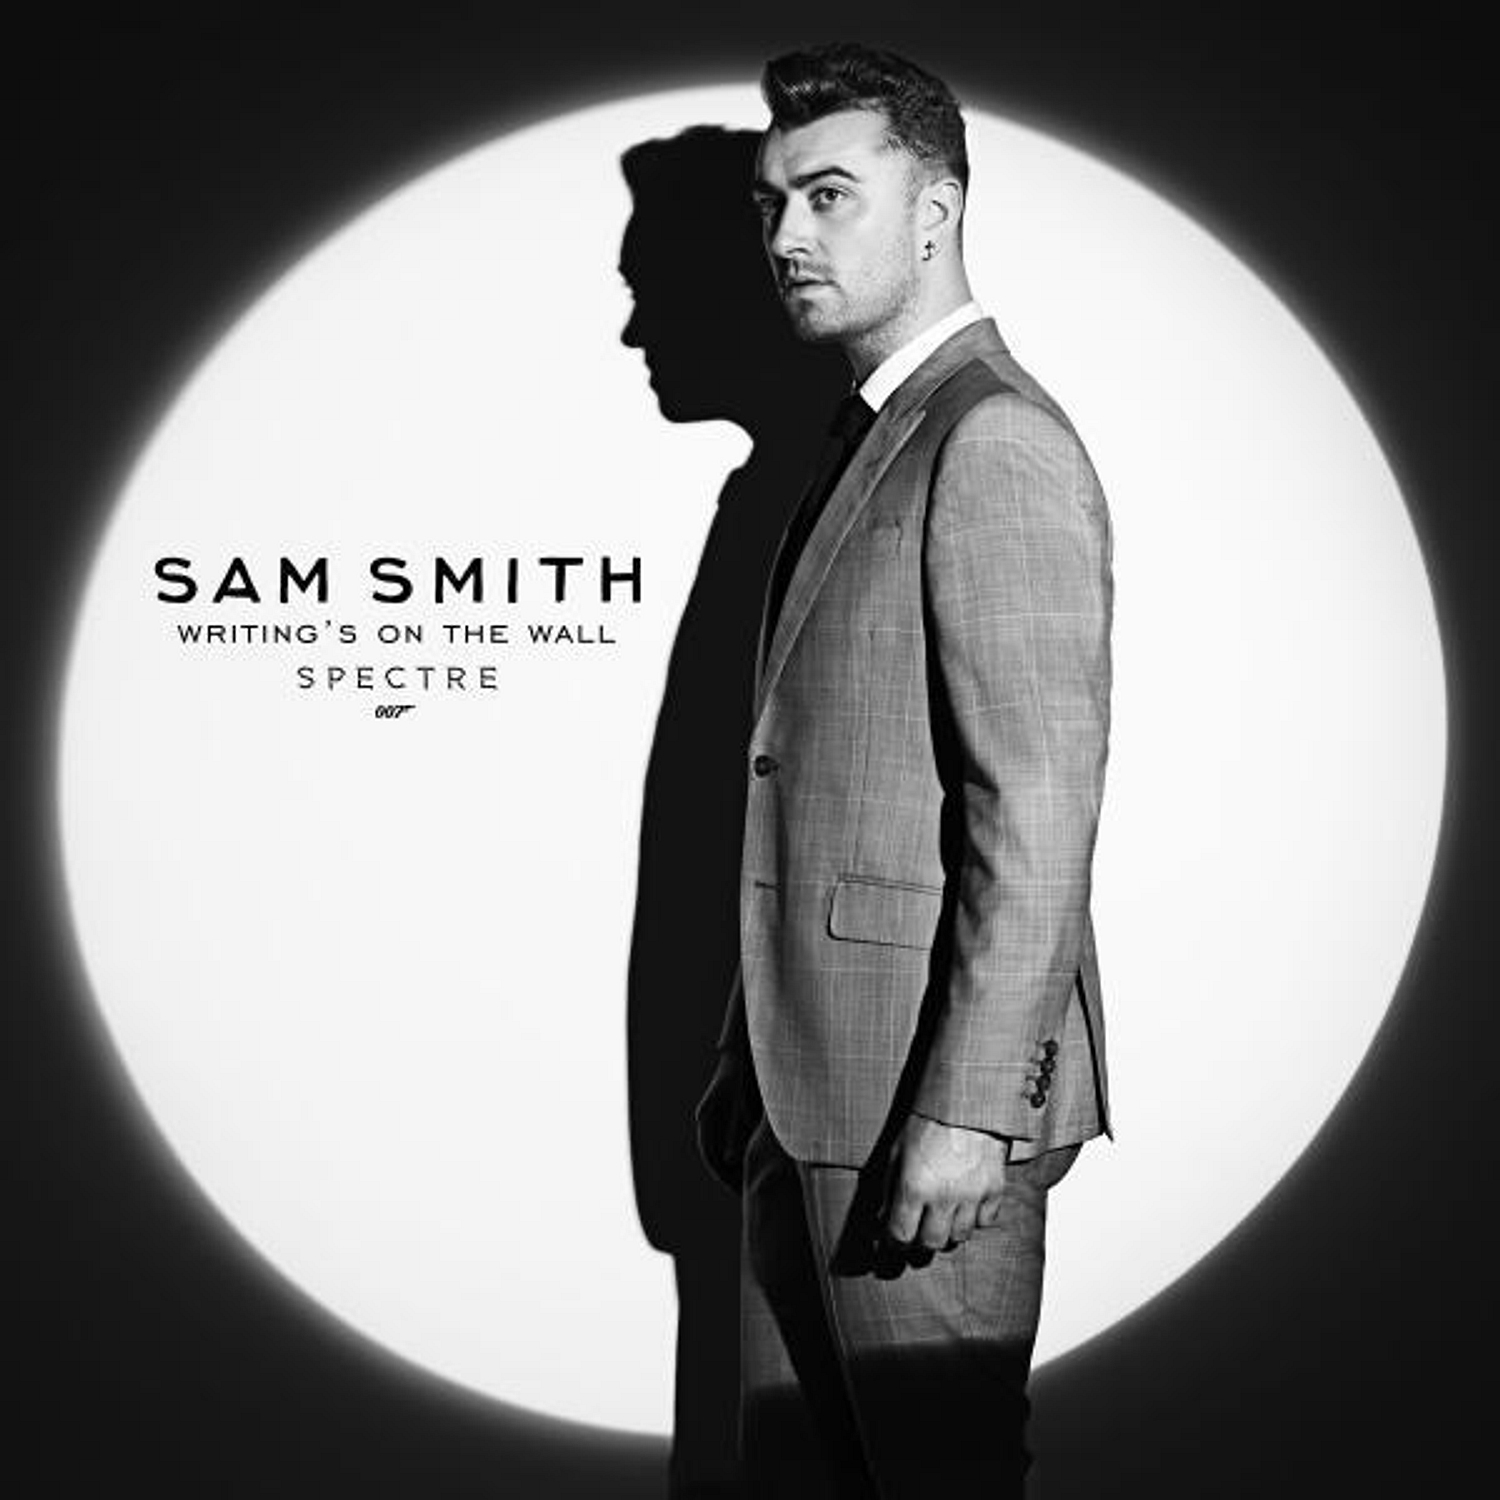 Sam Smith confirms he will sing the James Bond theme for 'Spectre'